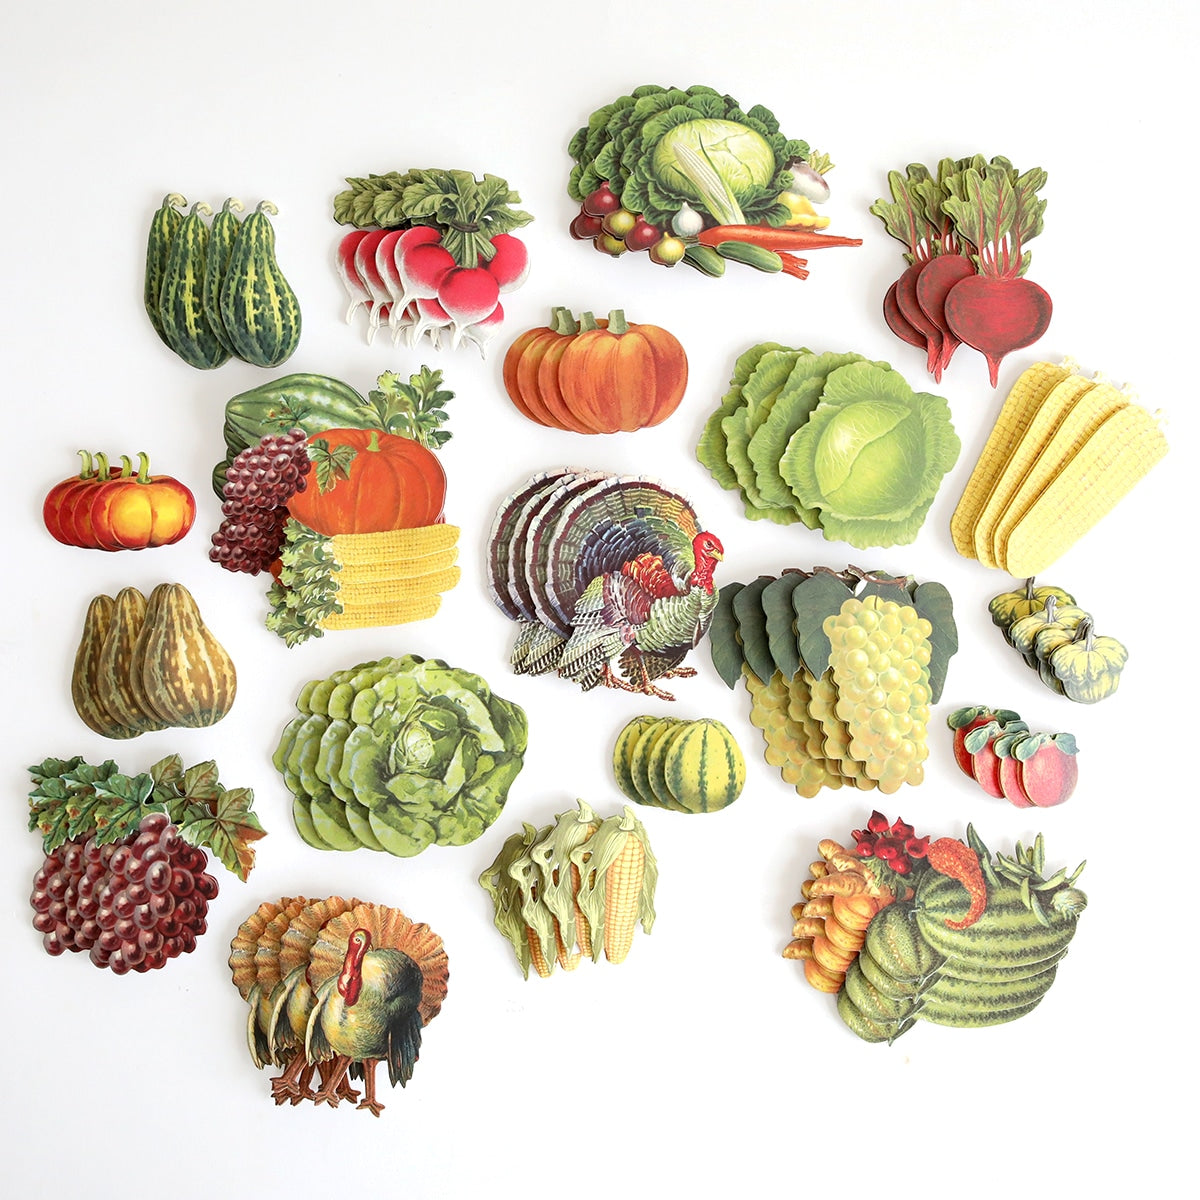 A collection of Retro Thanksgiving Stickers of vegetables and fruits.